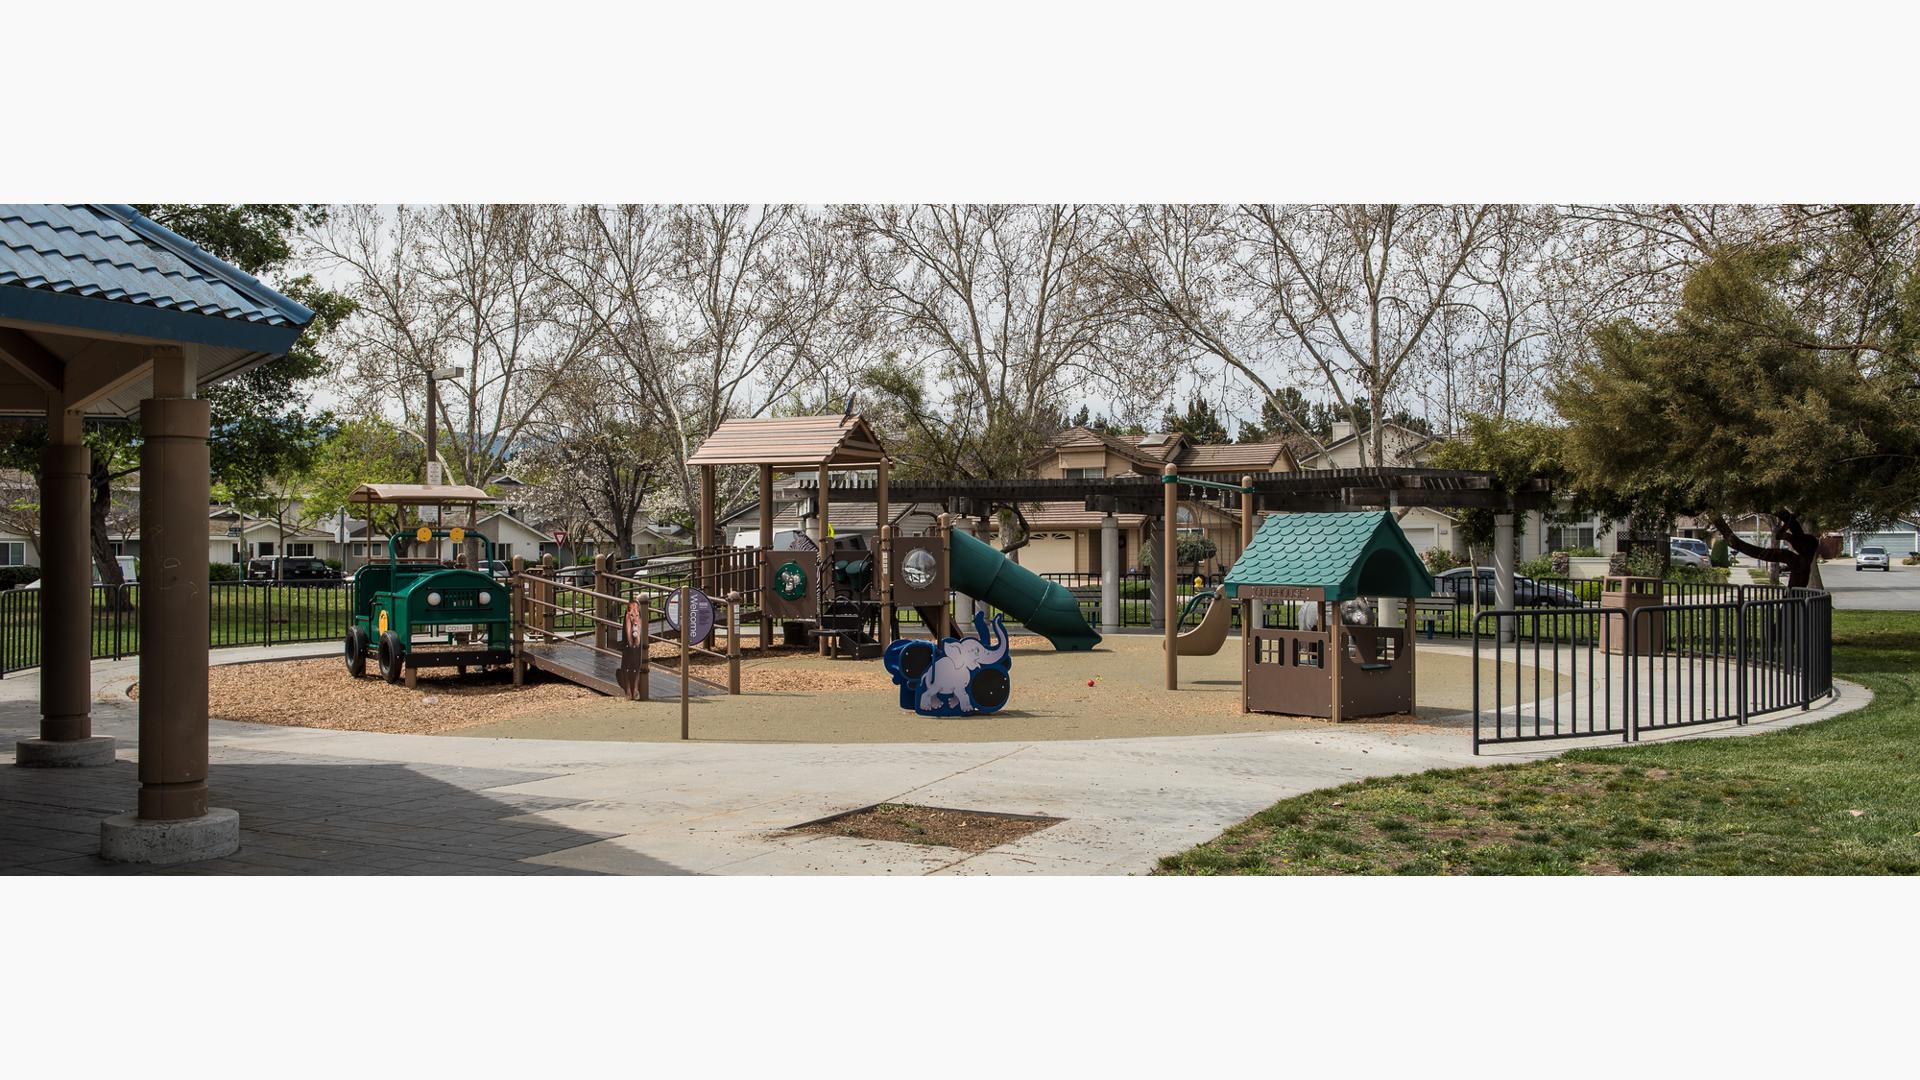 safari-themed PlayBooster® play structure in San Jose, California, for ages 5 to 12. The custom nature-inspired playground, is incorporating Recycled Wood-Grain panels and roofs. Ramps have been included to make the experience accessible.